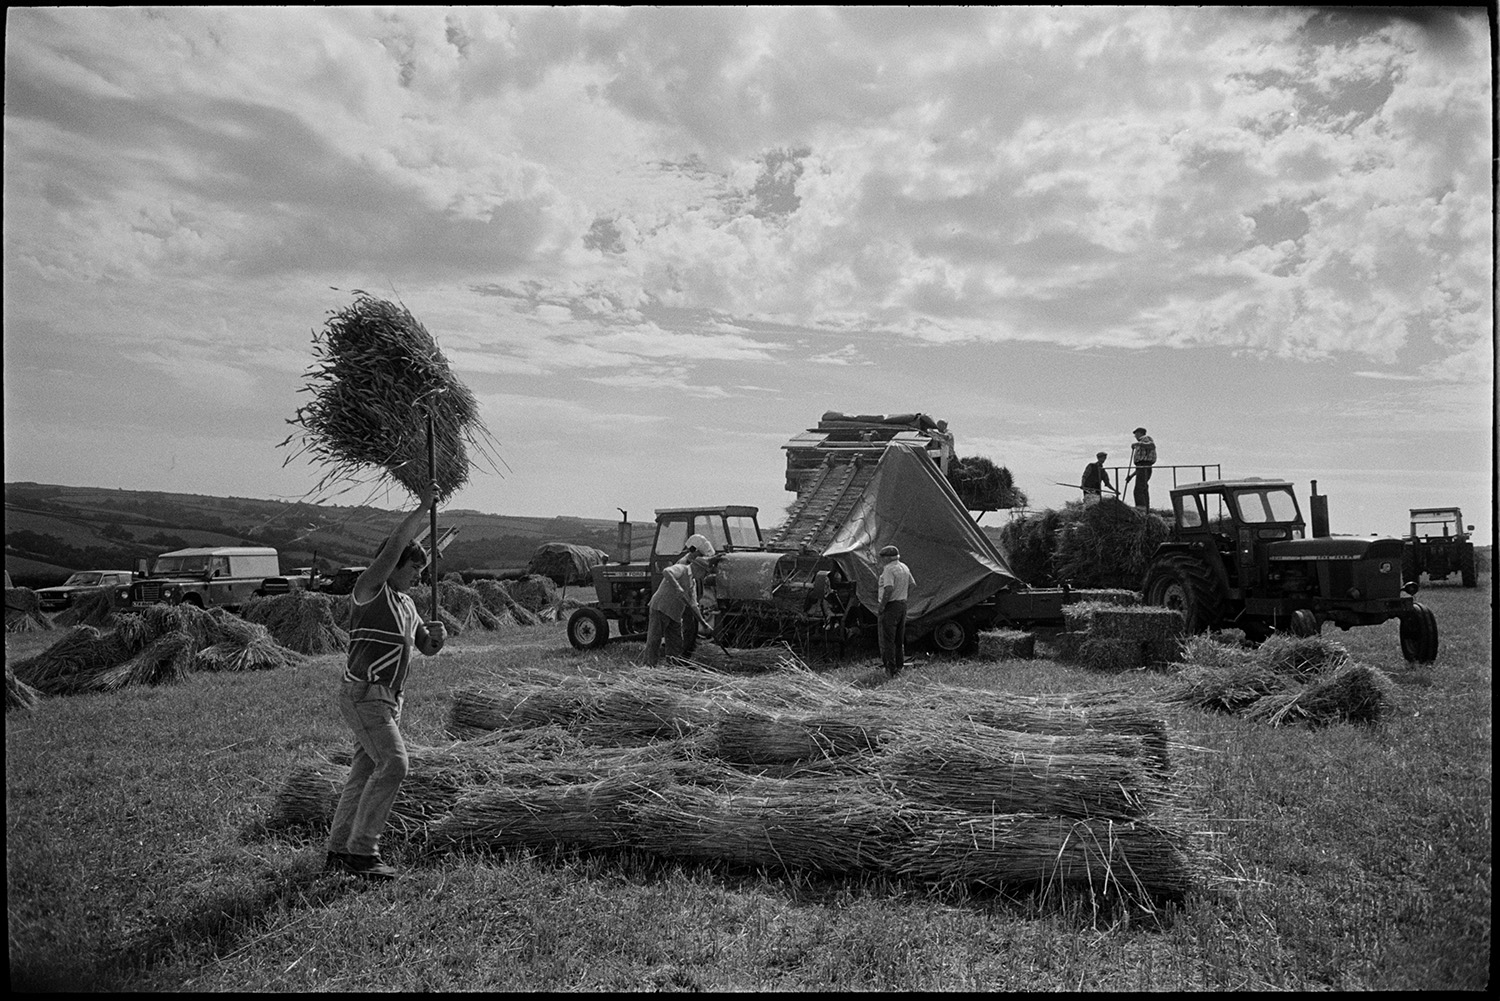 Reedcombing in harvest field men carrying nitches of wheat to reed comber.
[A group of men and a boy working with a reed comber in a field at Spittle, Chulmleigh. Tractors and a Land Rover are parked in the field. Bryan Down is the boy in the foreground wearing a Union Jack t-shirt. He is carrying bundles of reed above his head with a pitchfork to add to a pile of reed in the foreground.]